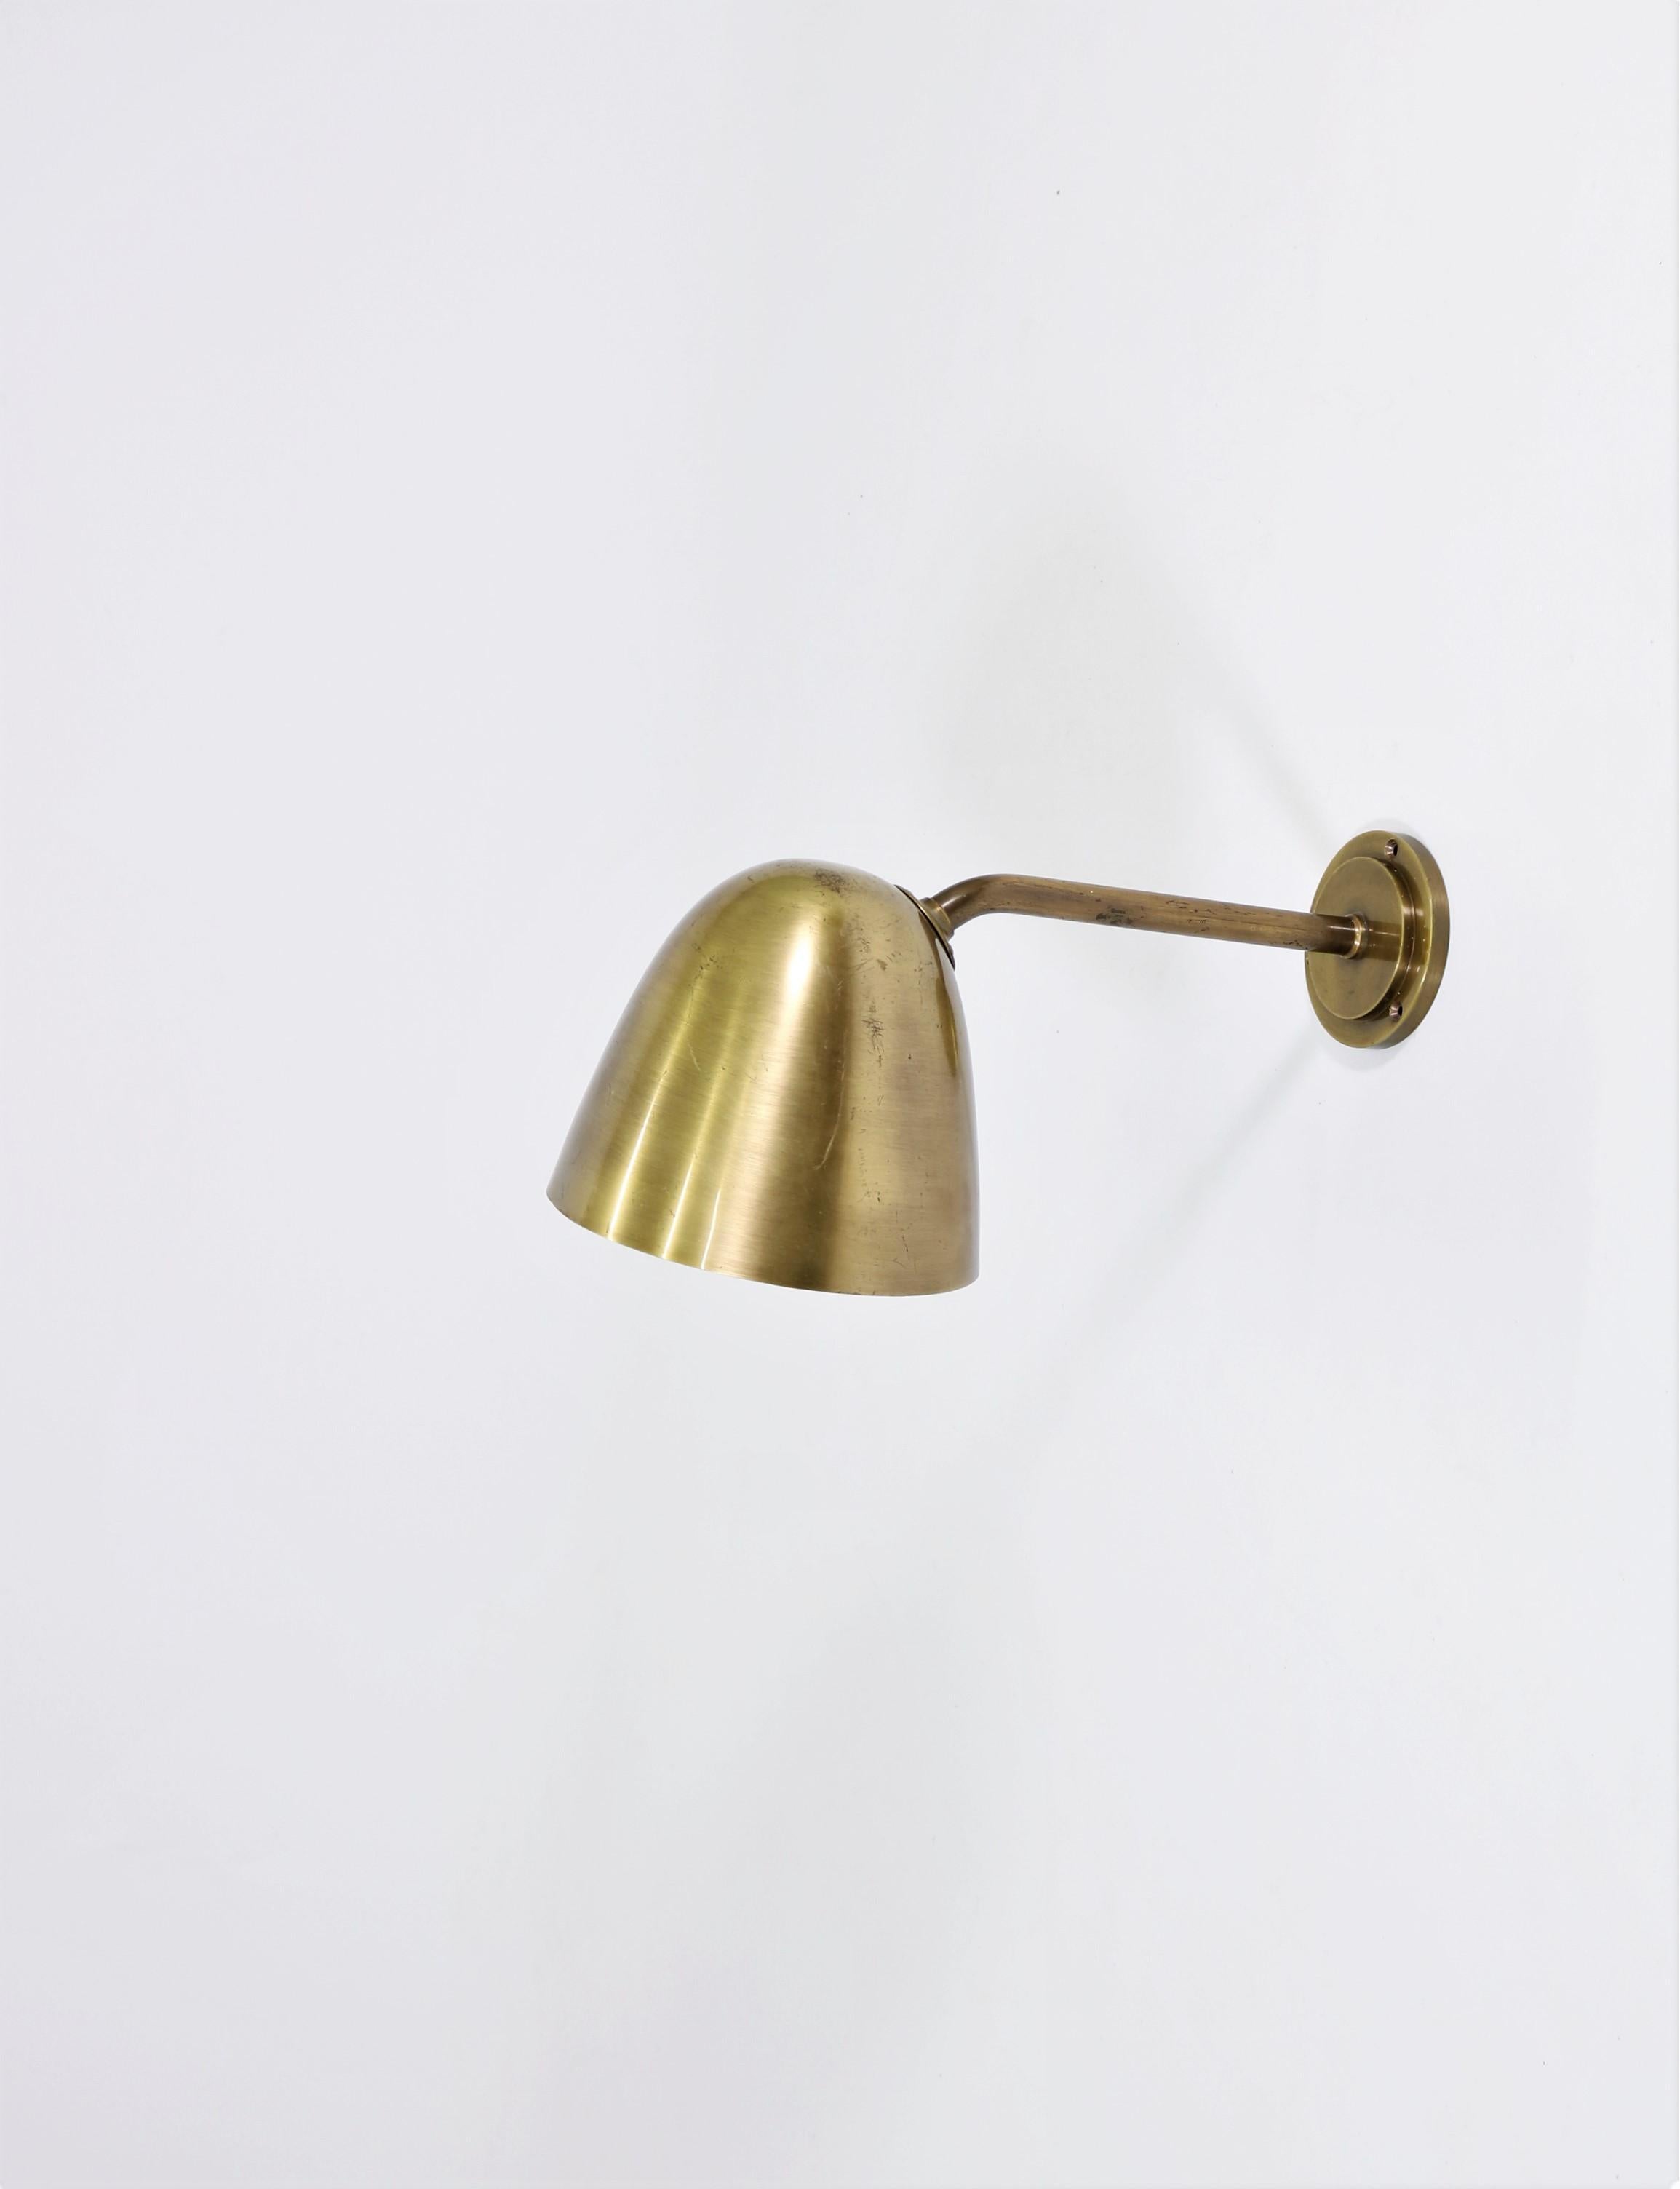 Scandinavian modern wall lamp attributed to Danish architect Vilhelm Lauritzen and manufactured by Fog & Morup, Copenhagen in the 1940s. The fixture is made from solid brass with a beautiful patina.